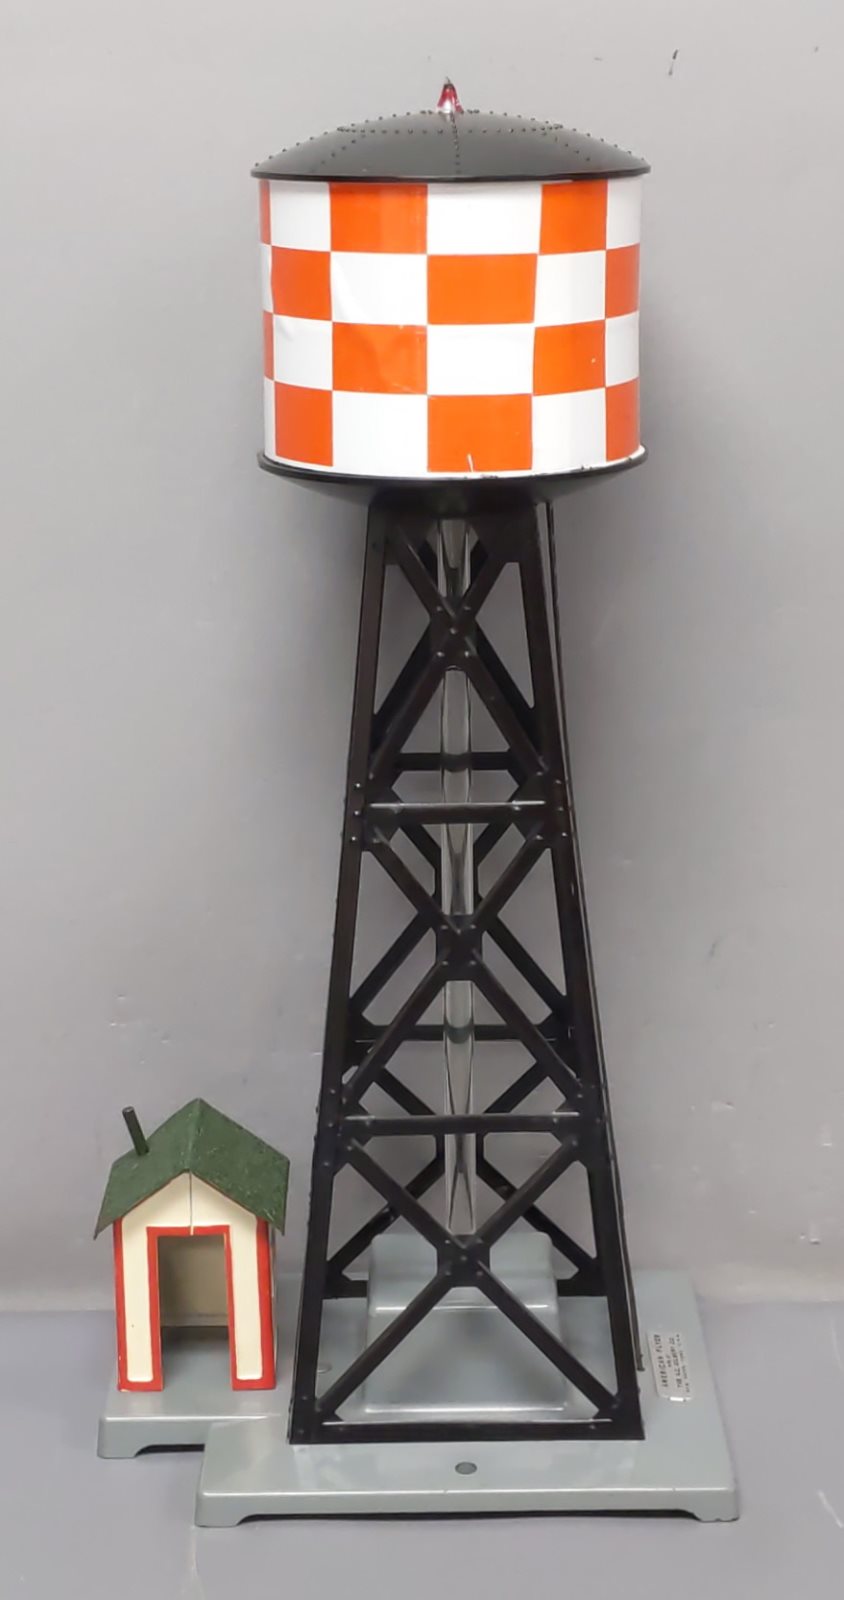 American Flyer 772 Vintage S Checkerboard Water Tower with Bubble Tube EX